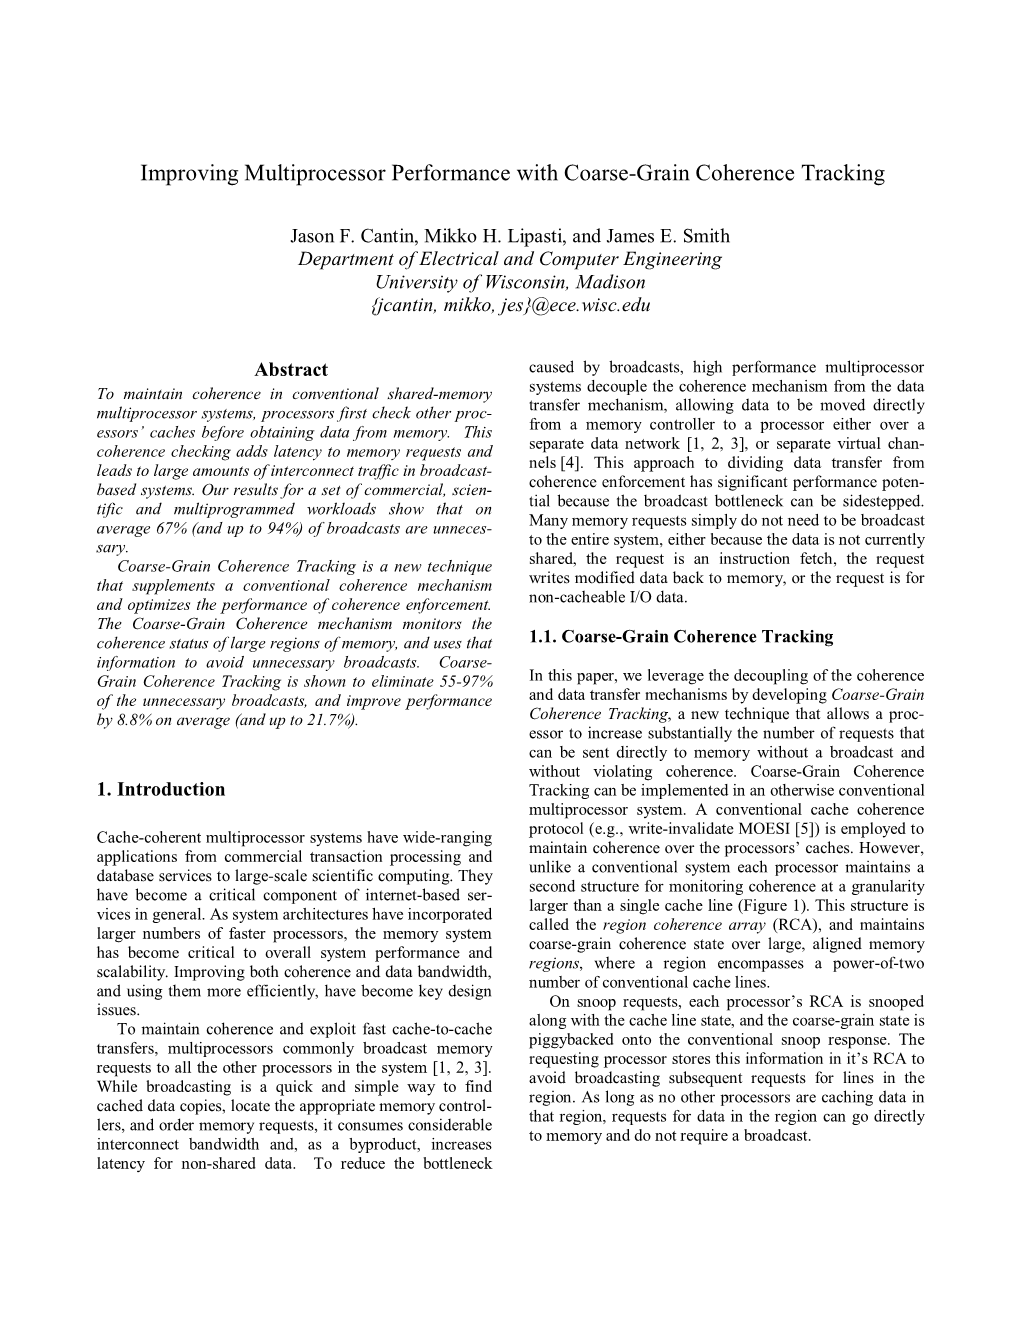 Improving Multiprocessor Performance with Coarse-Grain Coherence Tracking